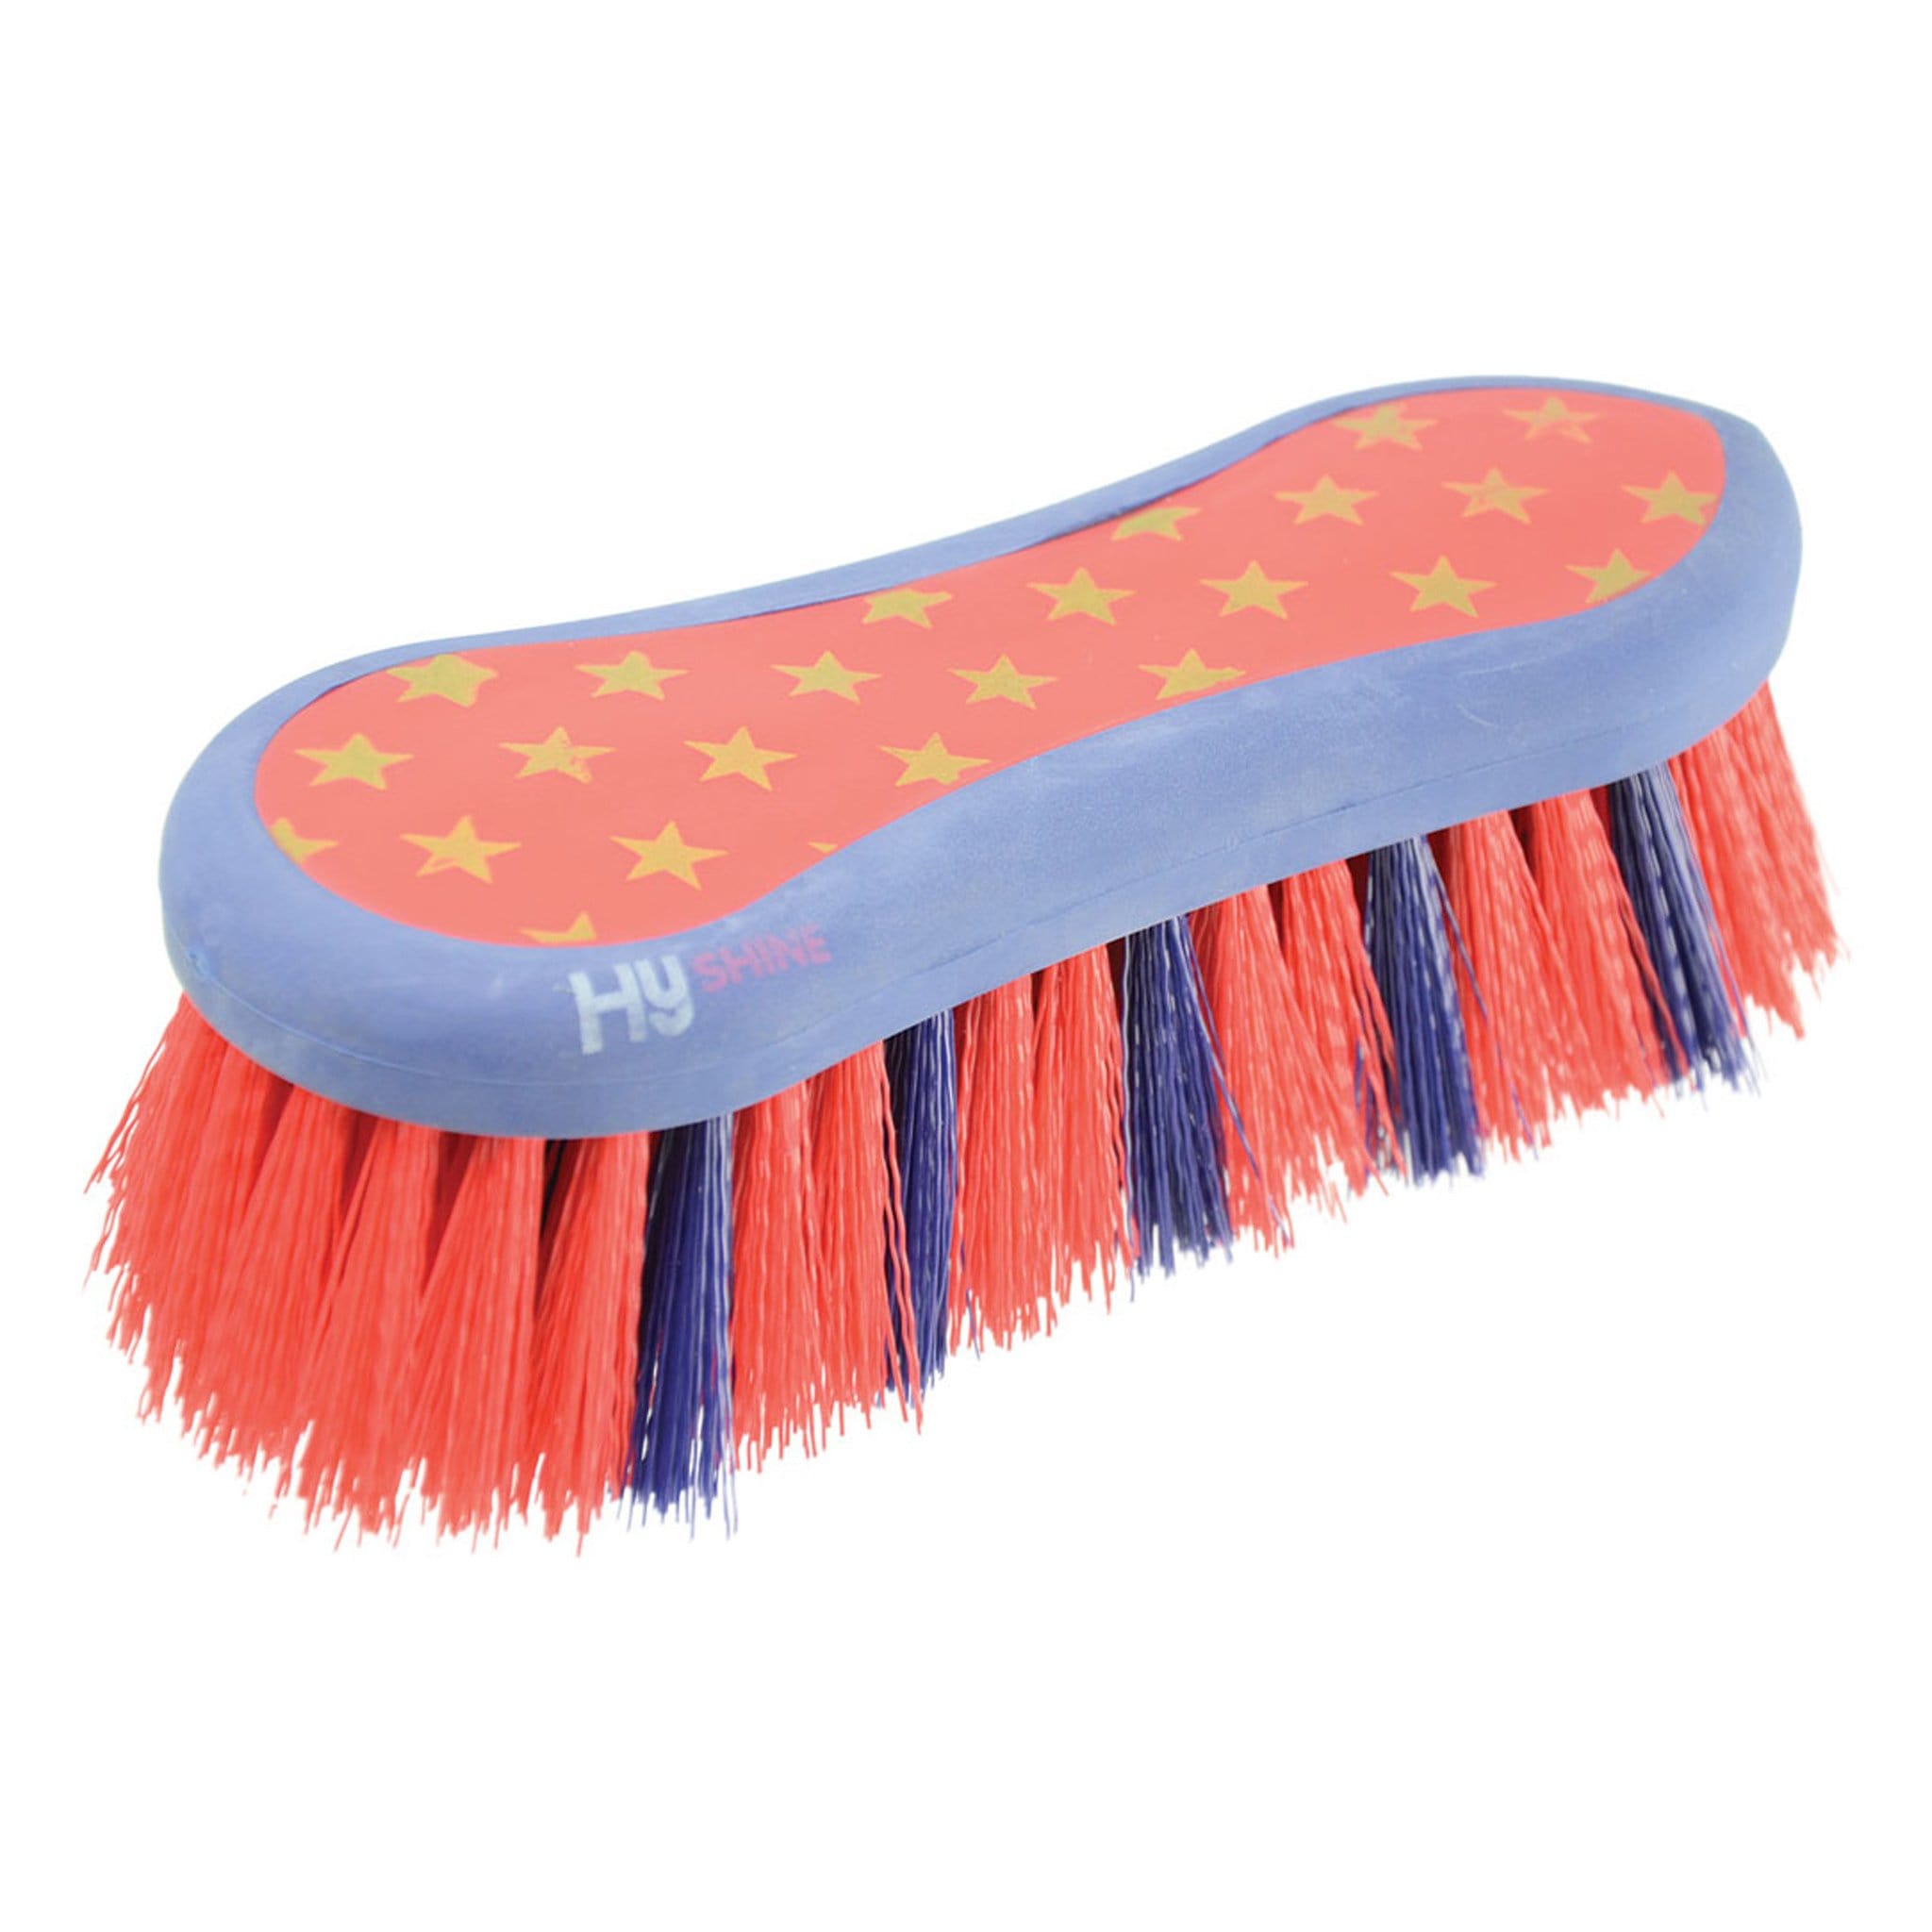 HySHINE Star Easy Grip Dandy Brush 4587 Navy and Red